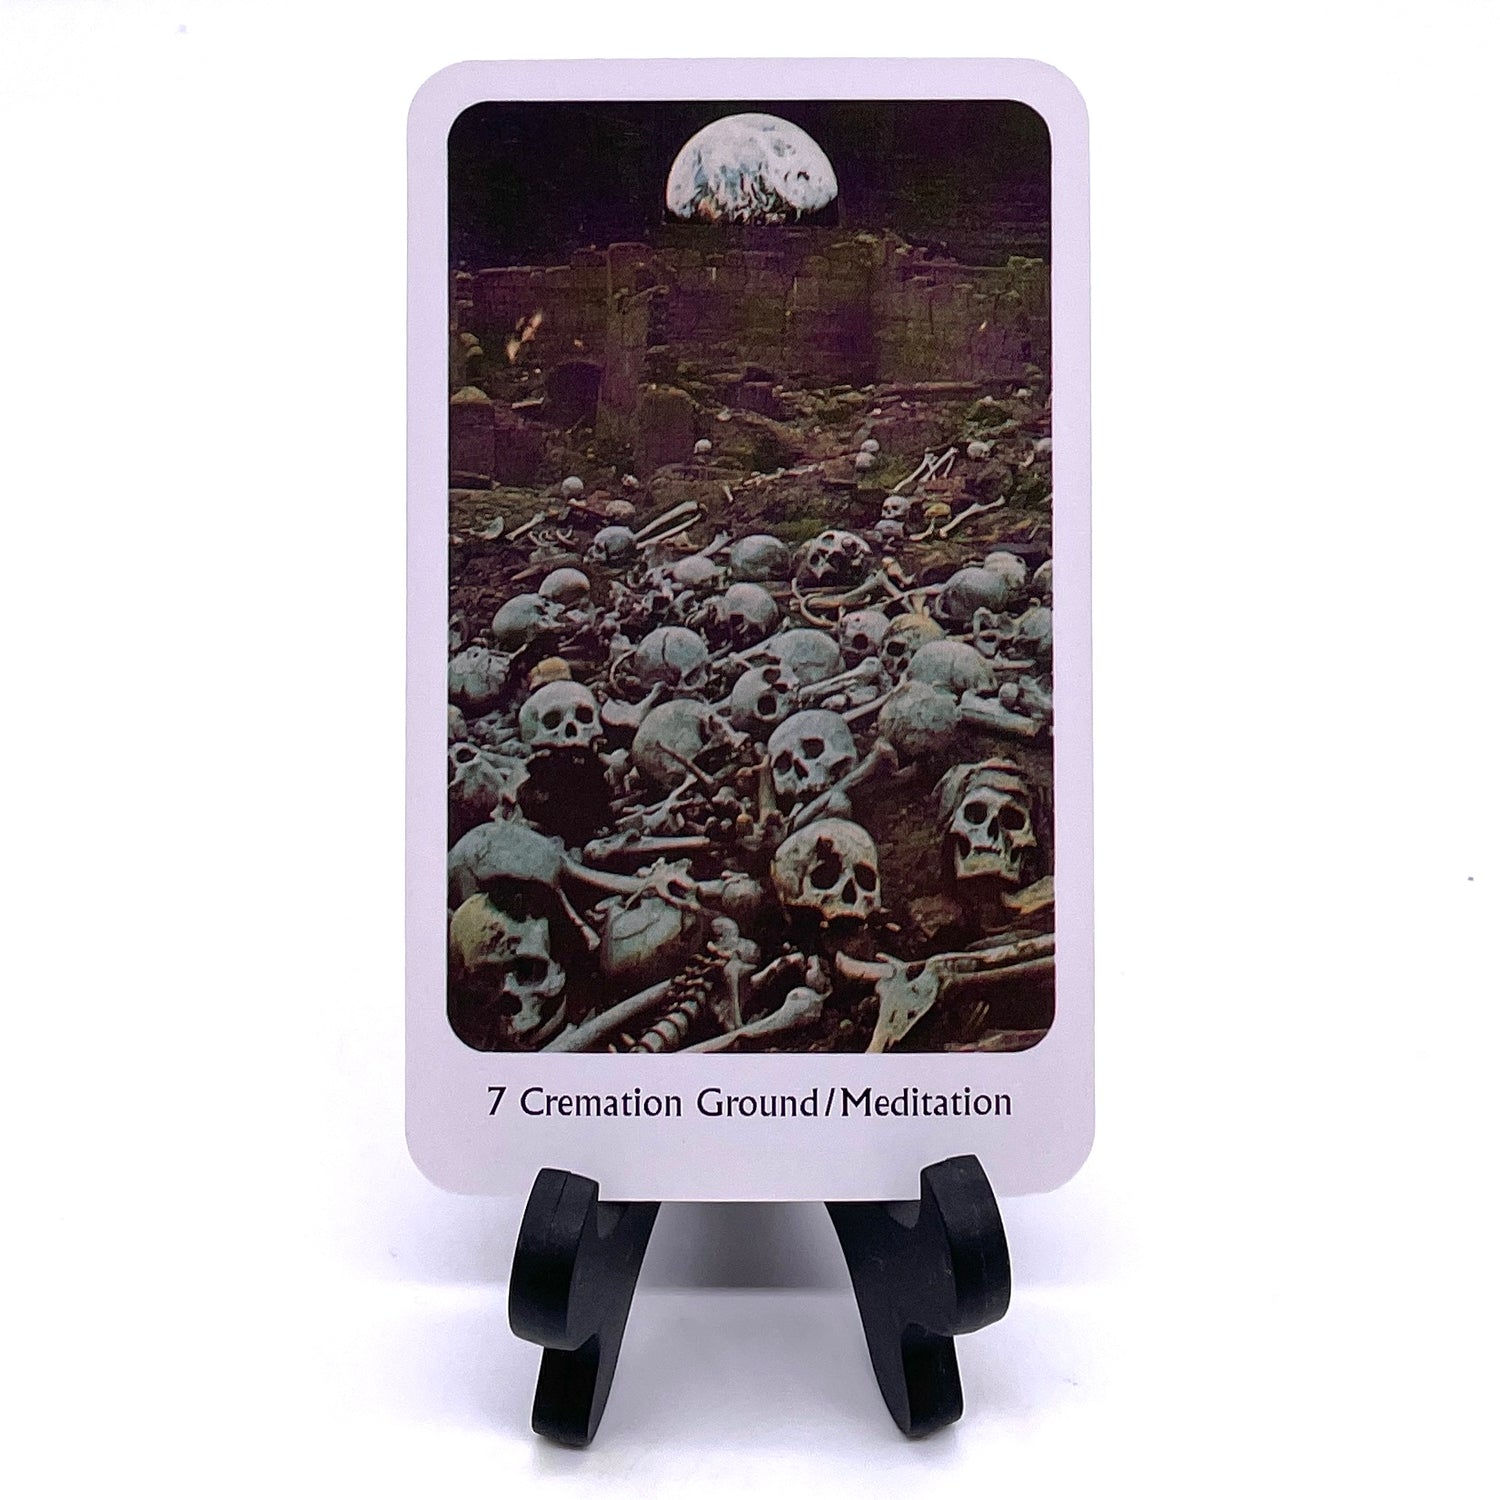 Photo of card #7 "Cremation Ground/Meditation" featuring collaged images of a boneyard scene with cliffs and the moon in the background.